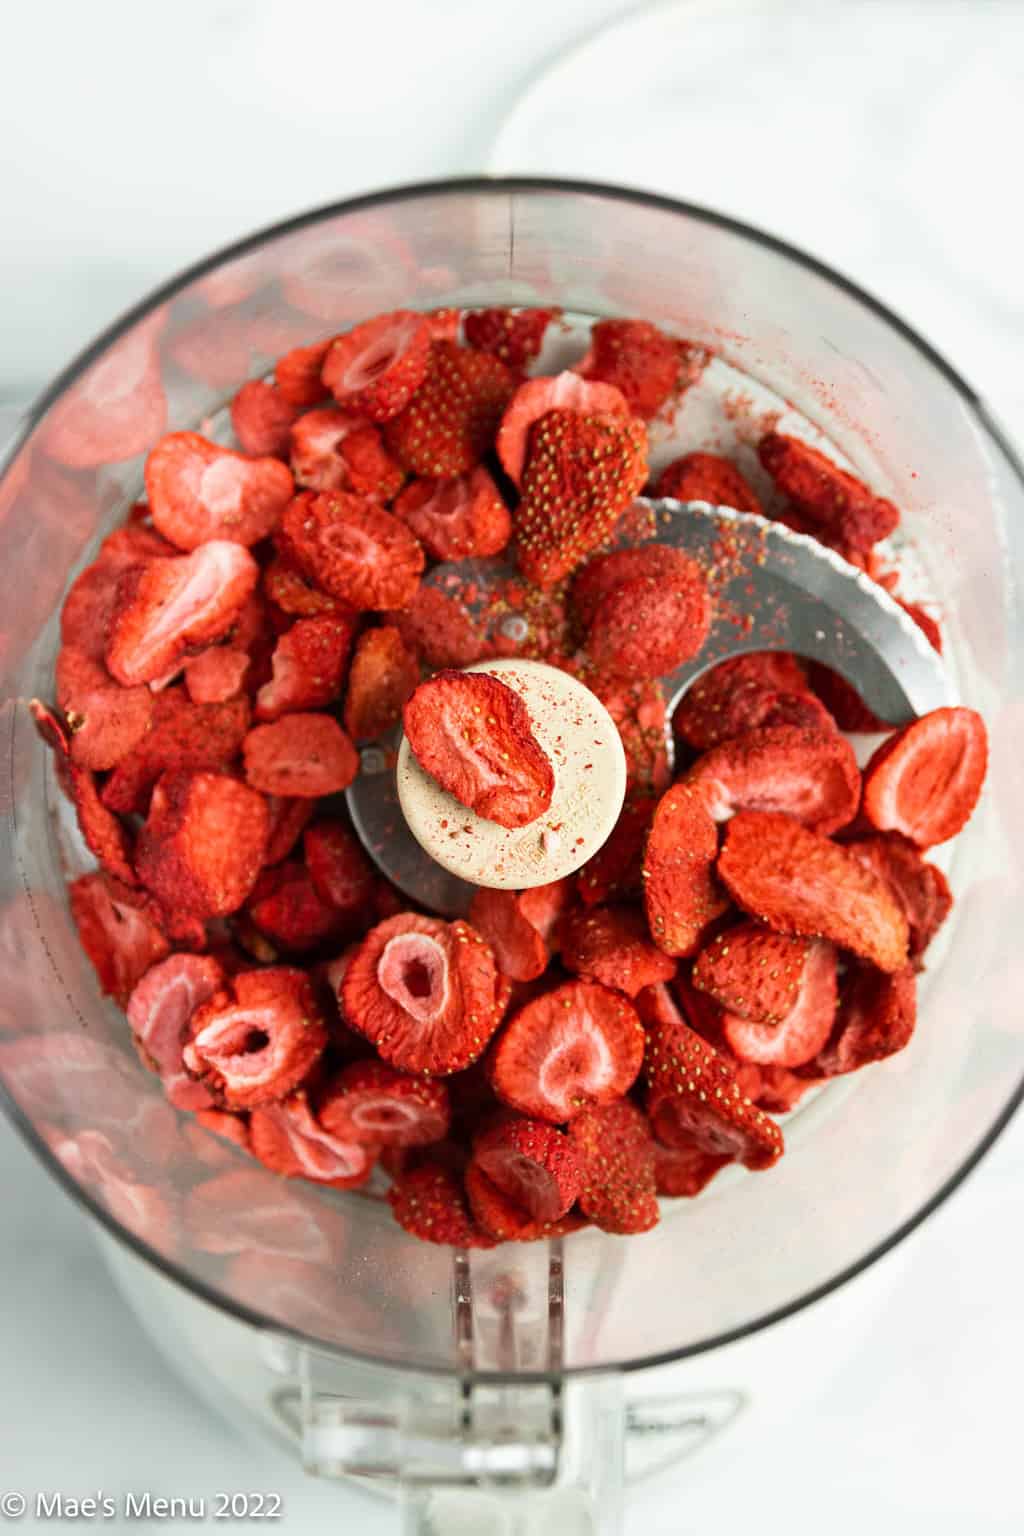 Freeze-dried strawberries in a food processor.